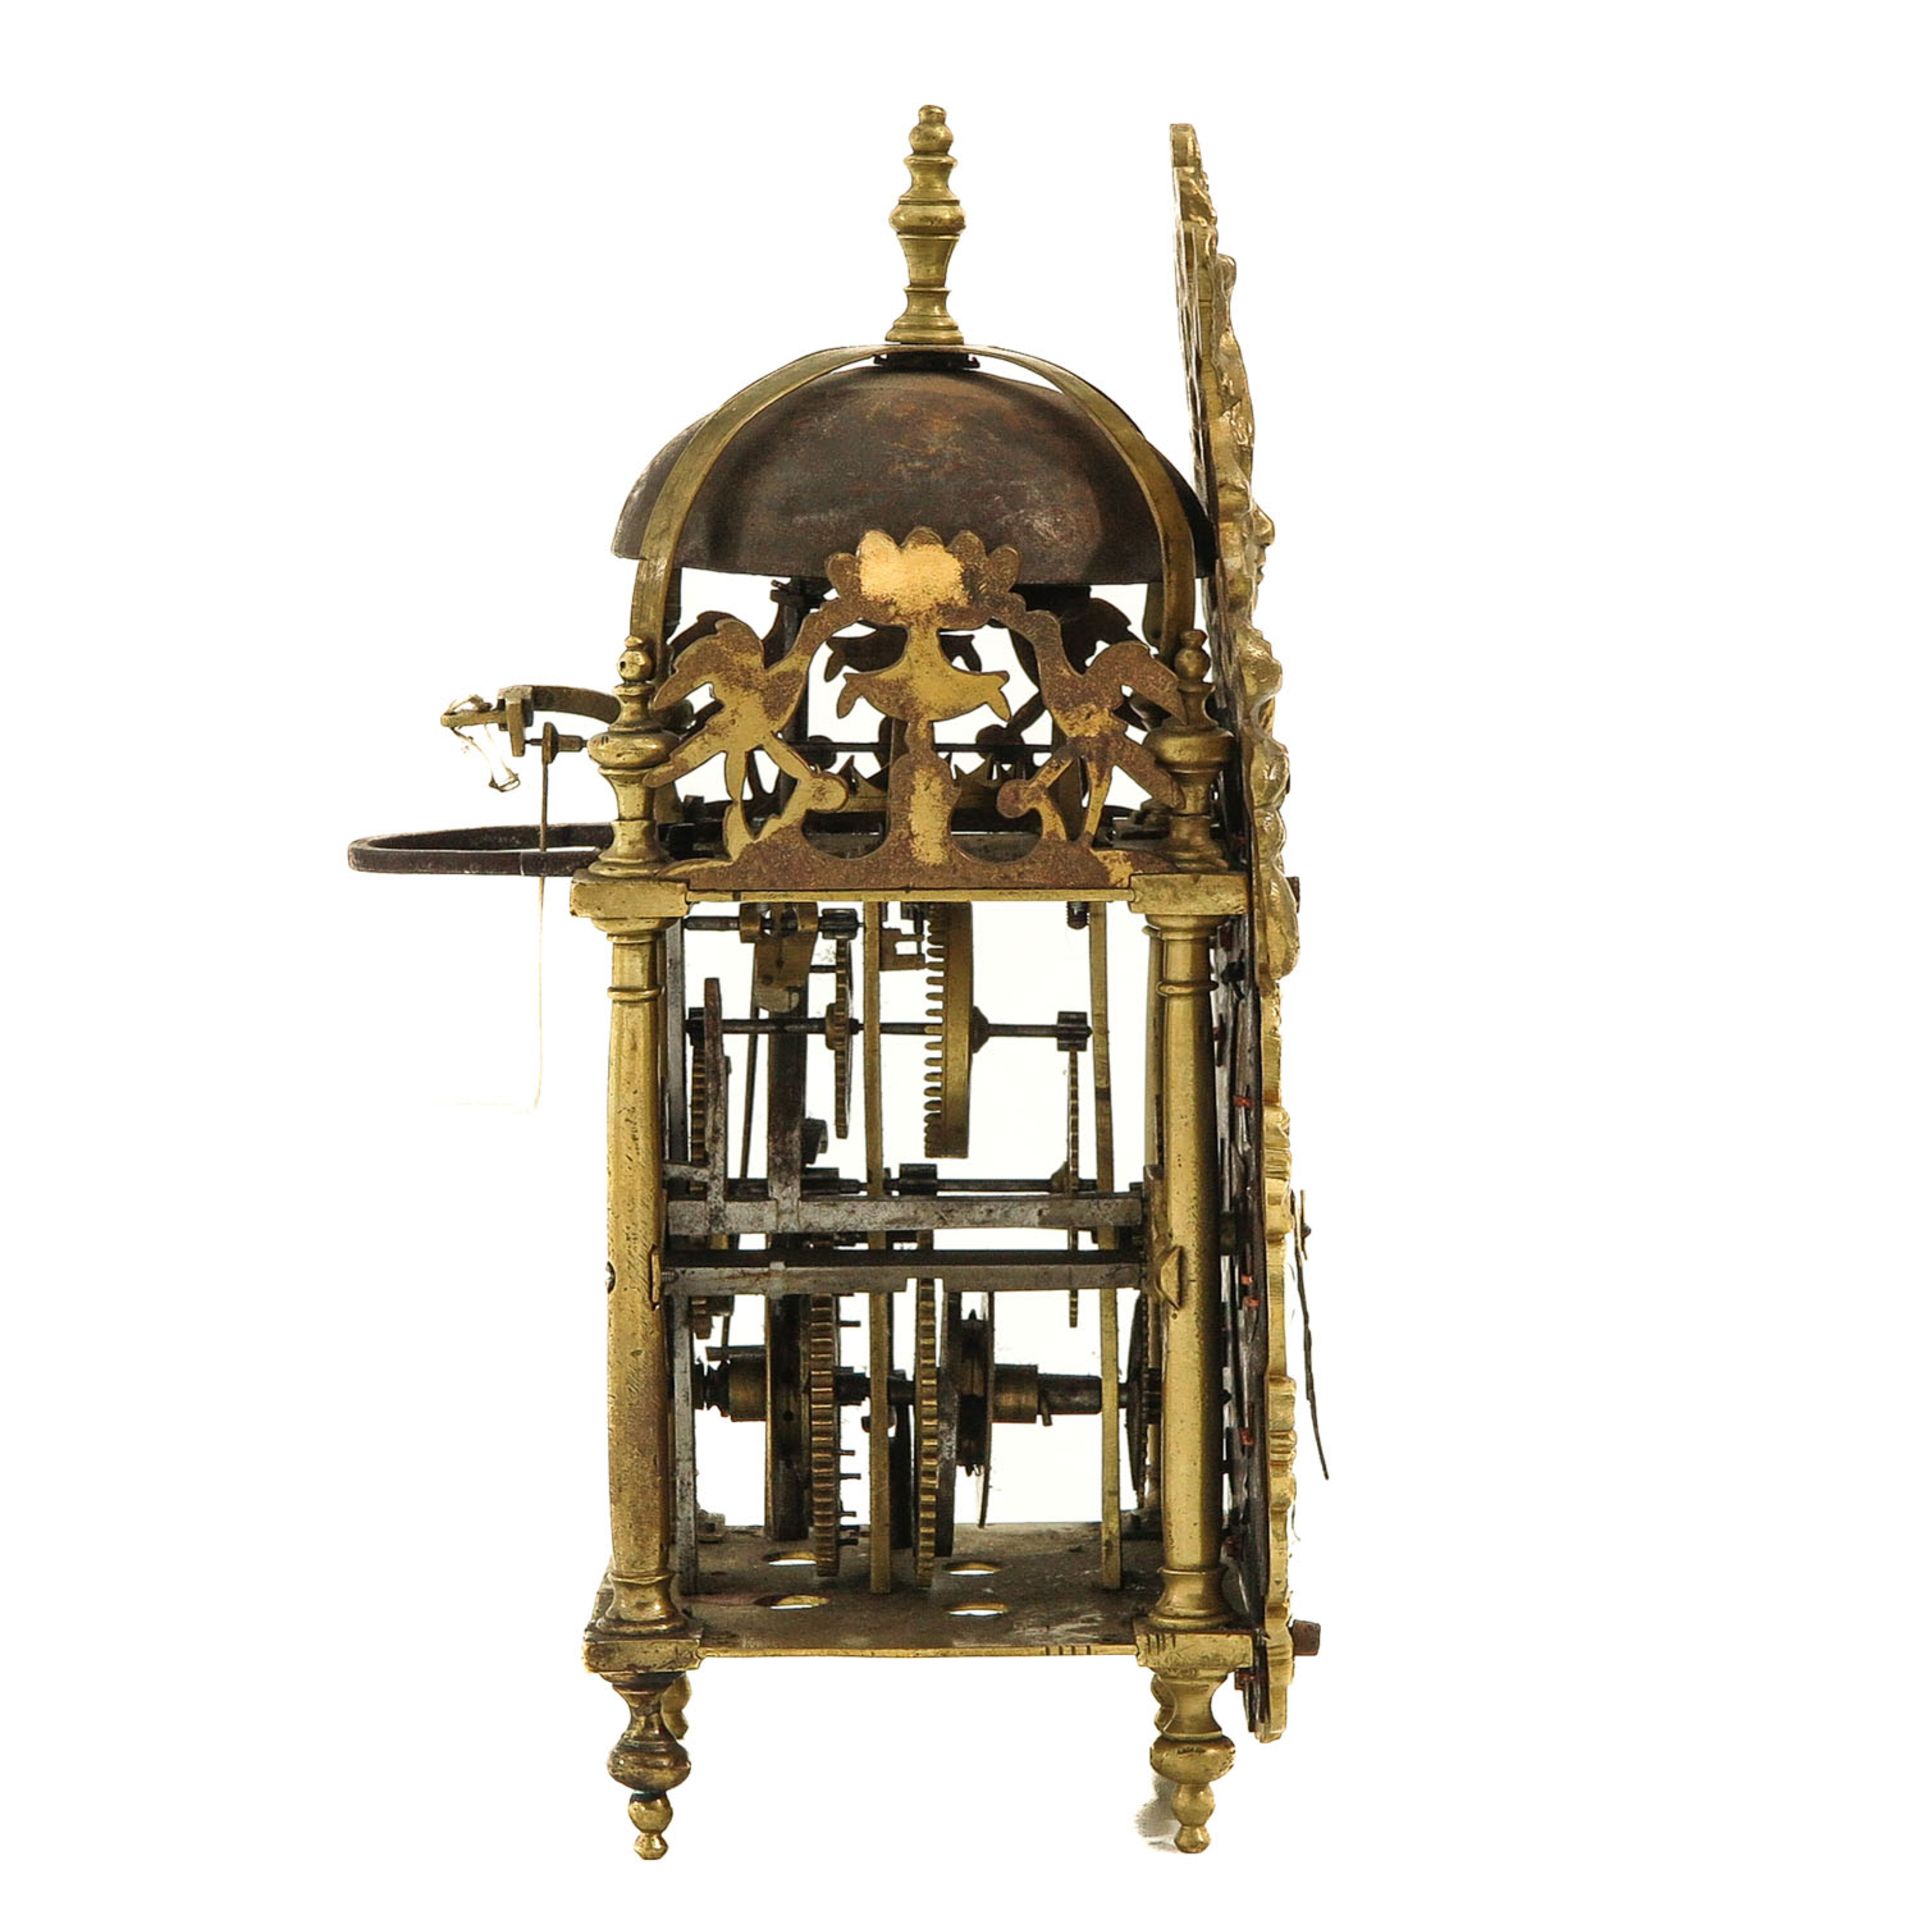 An 18th Century French Lantern Clock - Image 4 of 10